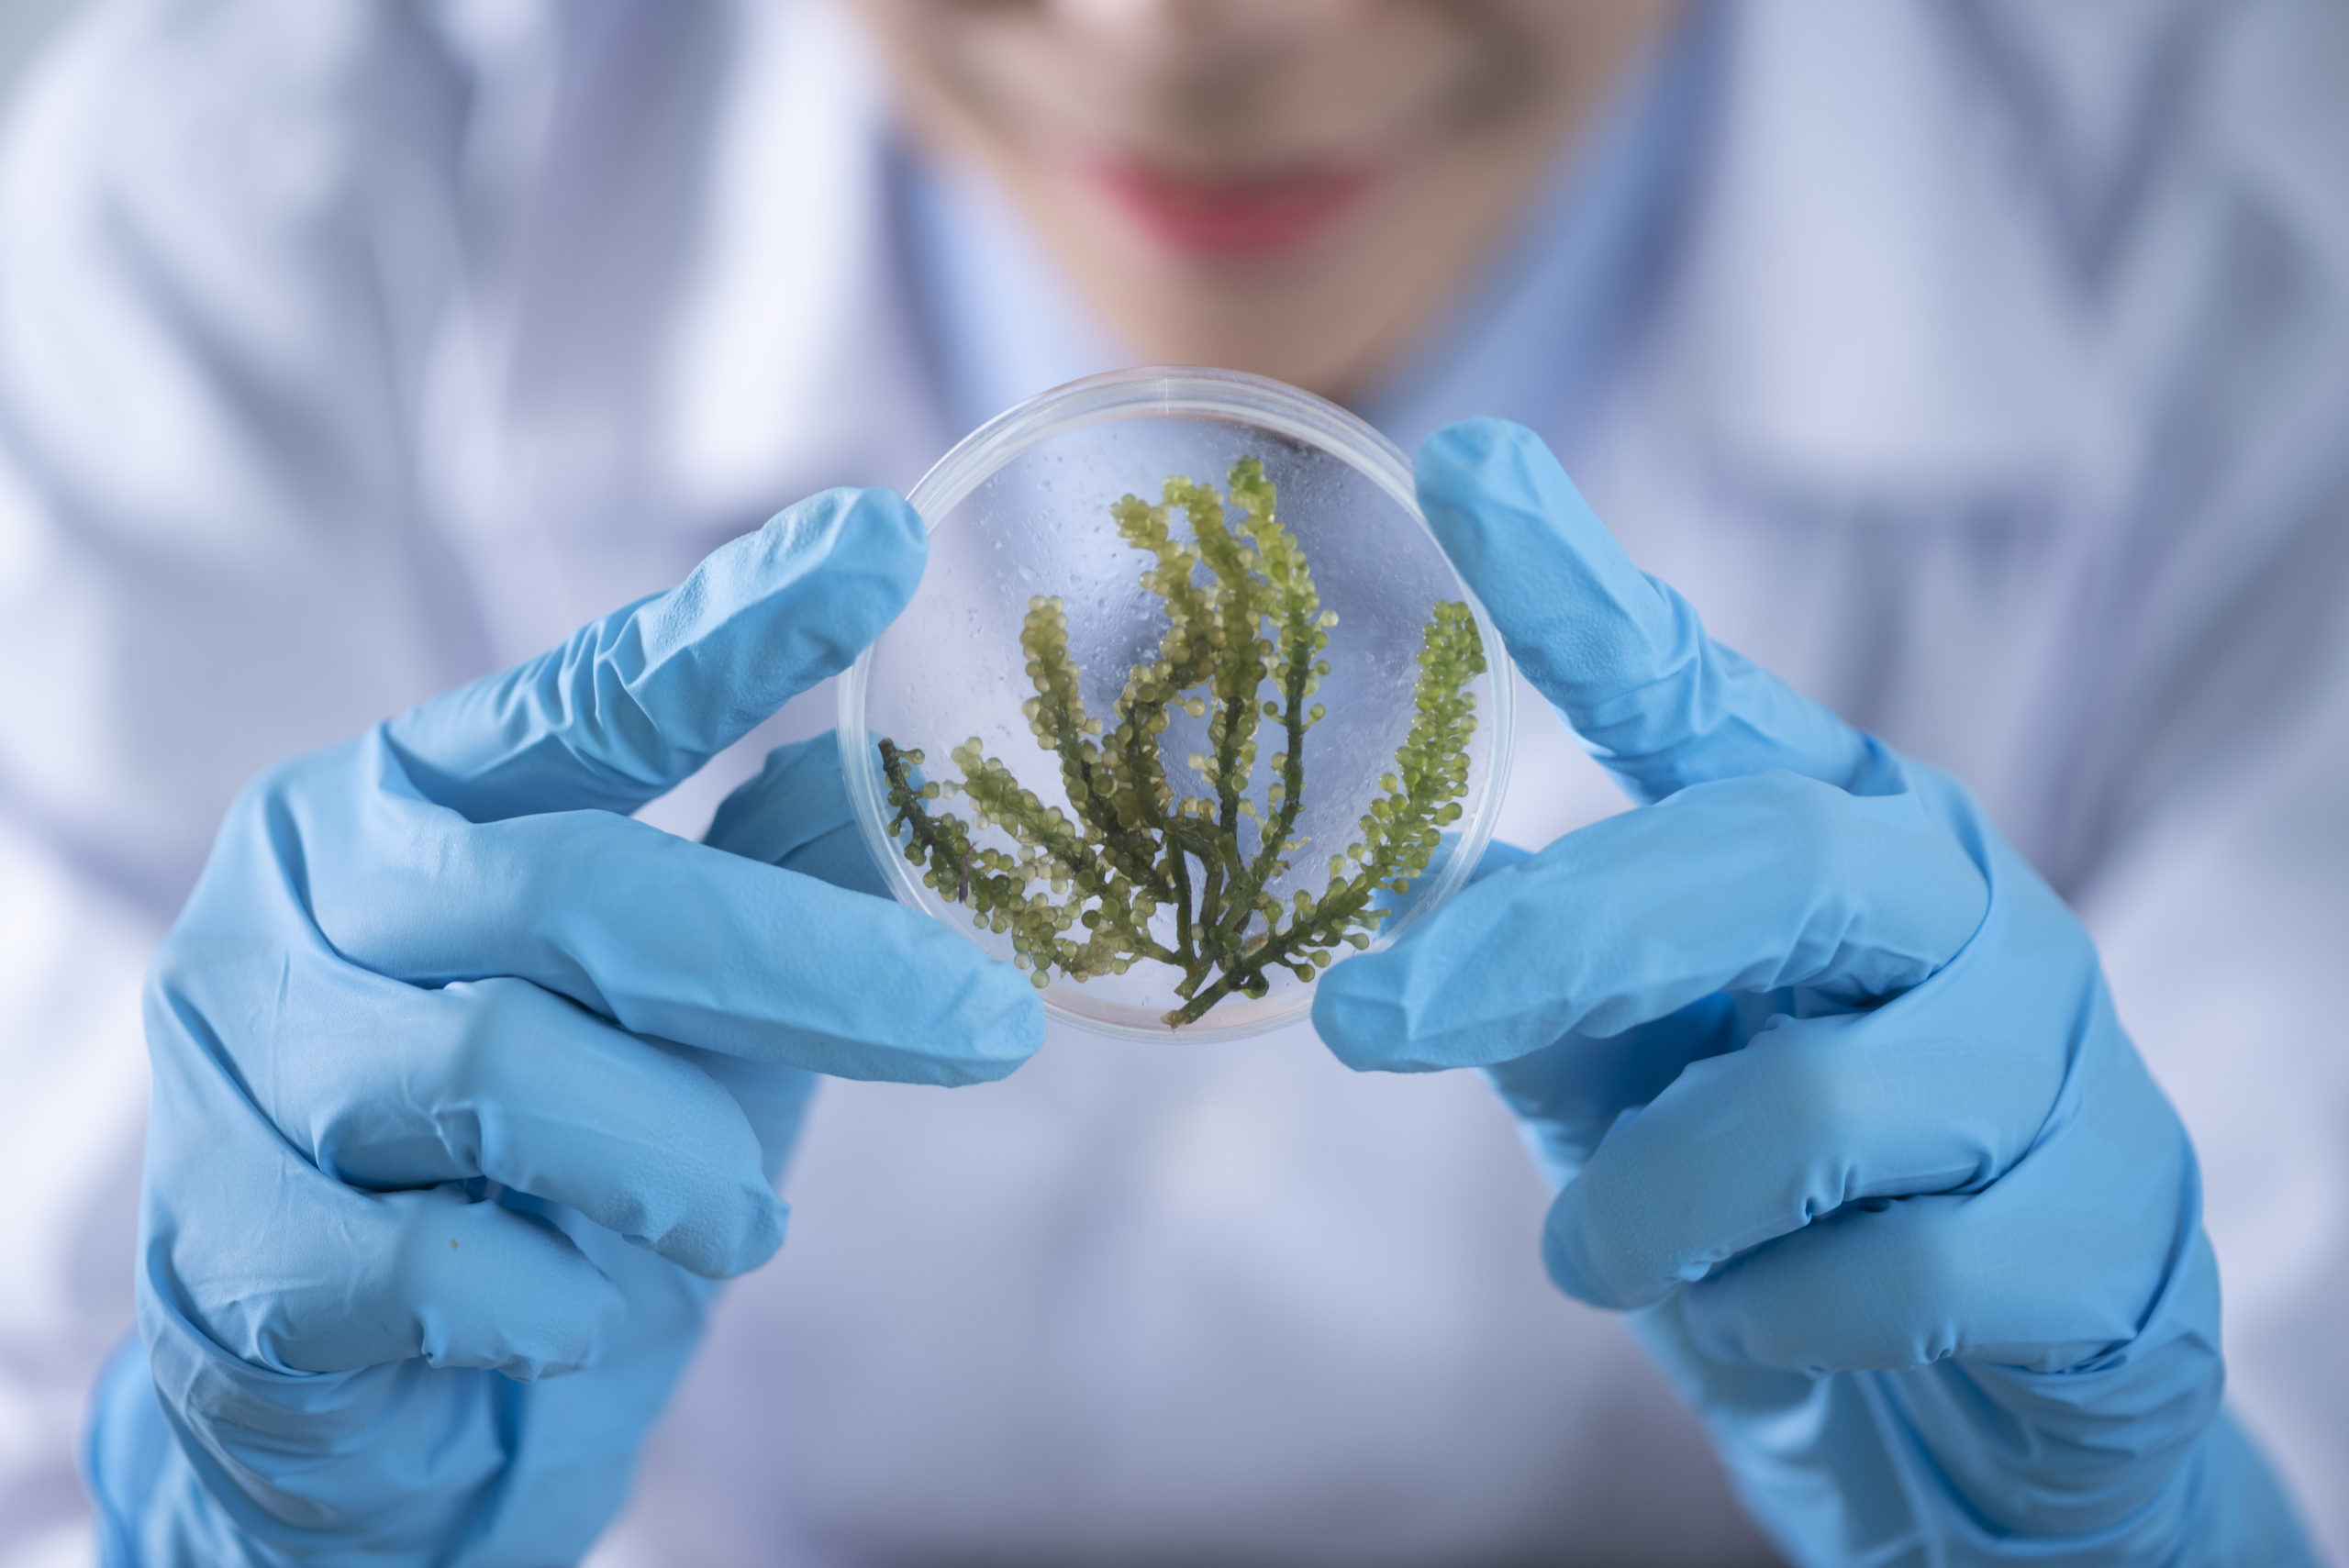 Lab worker holding a Petri dish of seaweed